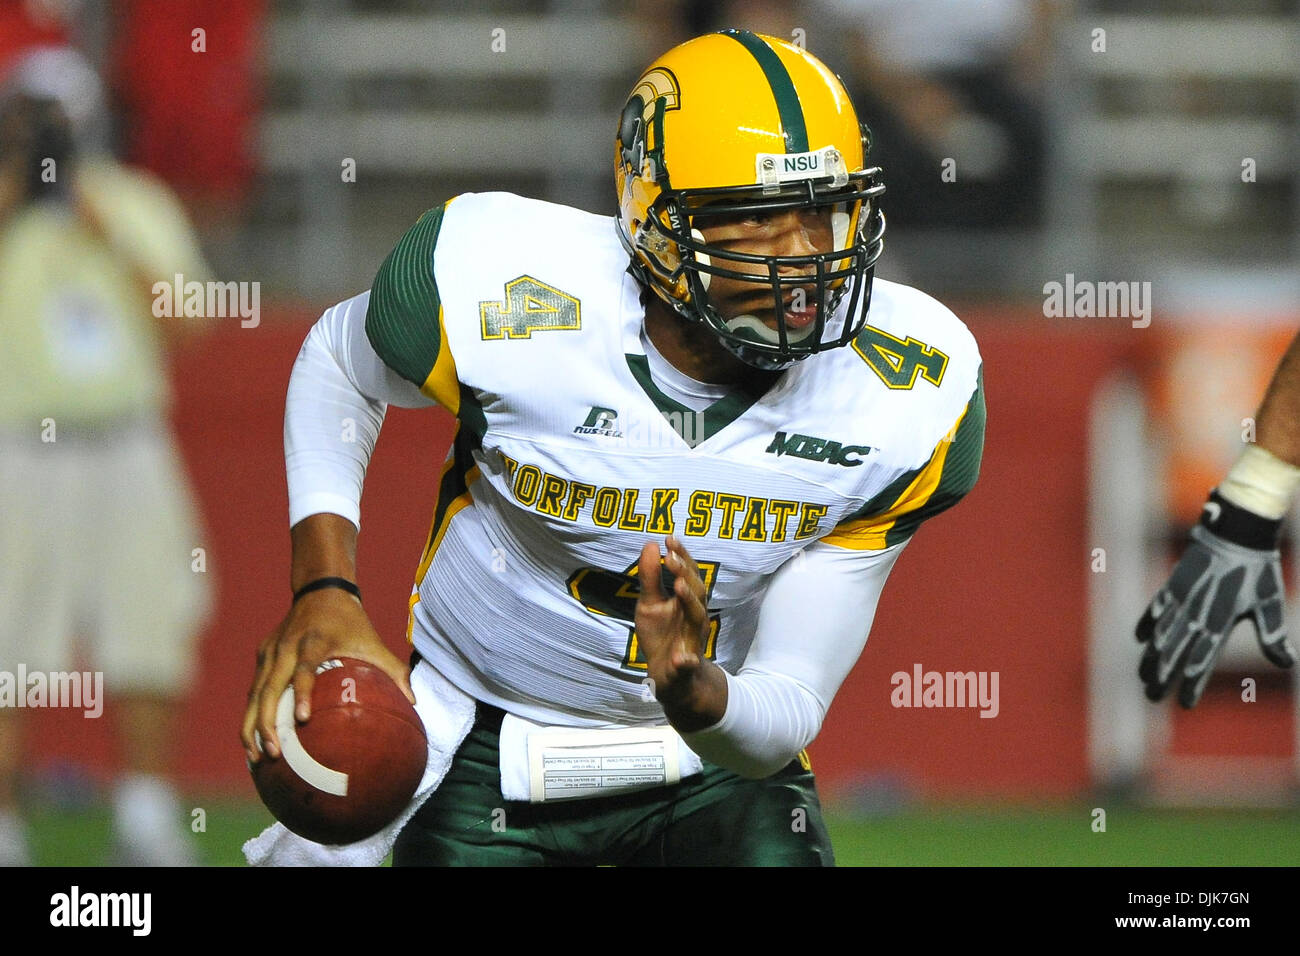 Norfolk State University High Resolution Stock Photography And Images Alamy